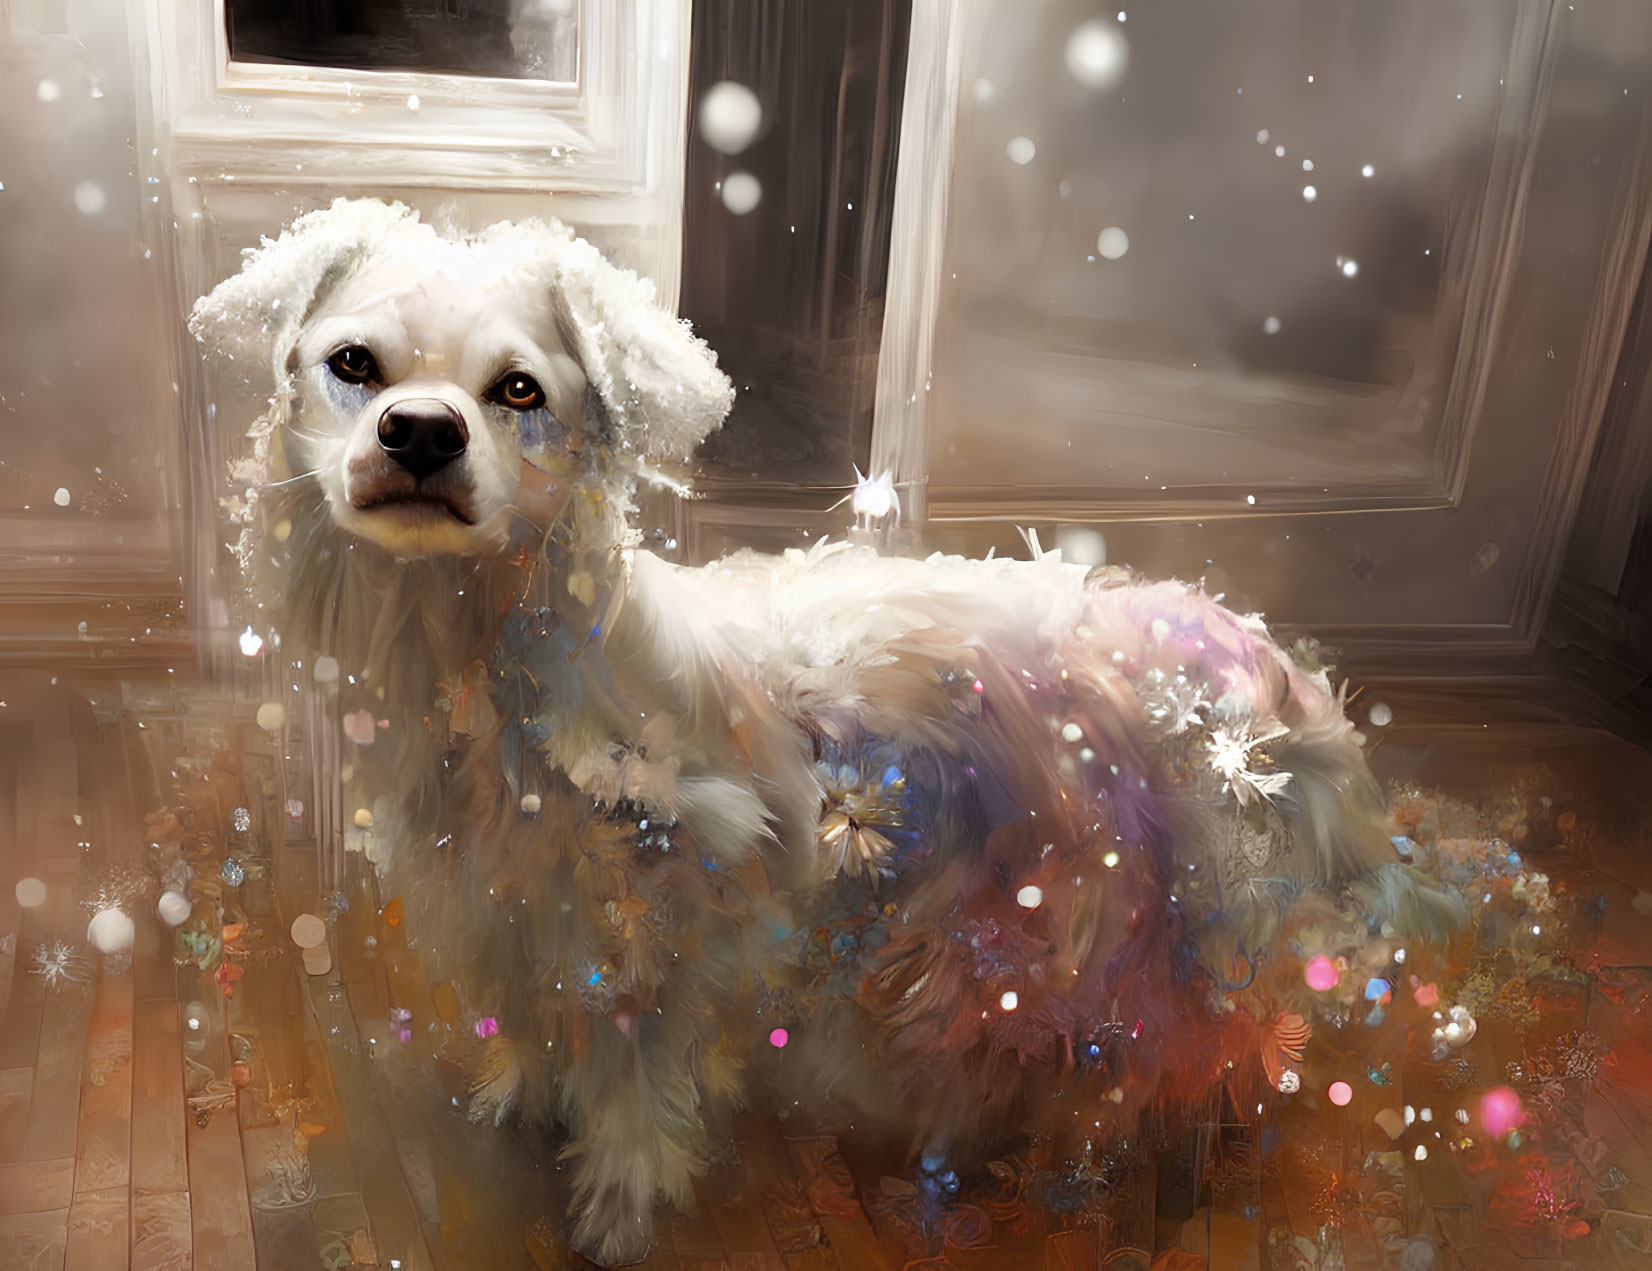 Fluffy white dog indoors with snowflakes, magical atmosphere